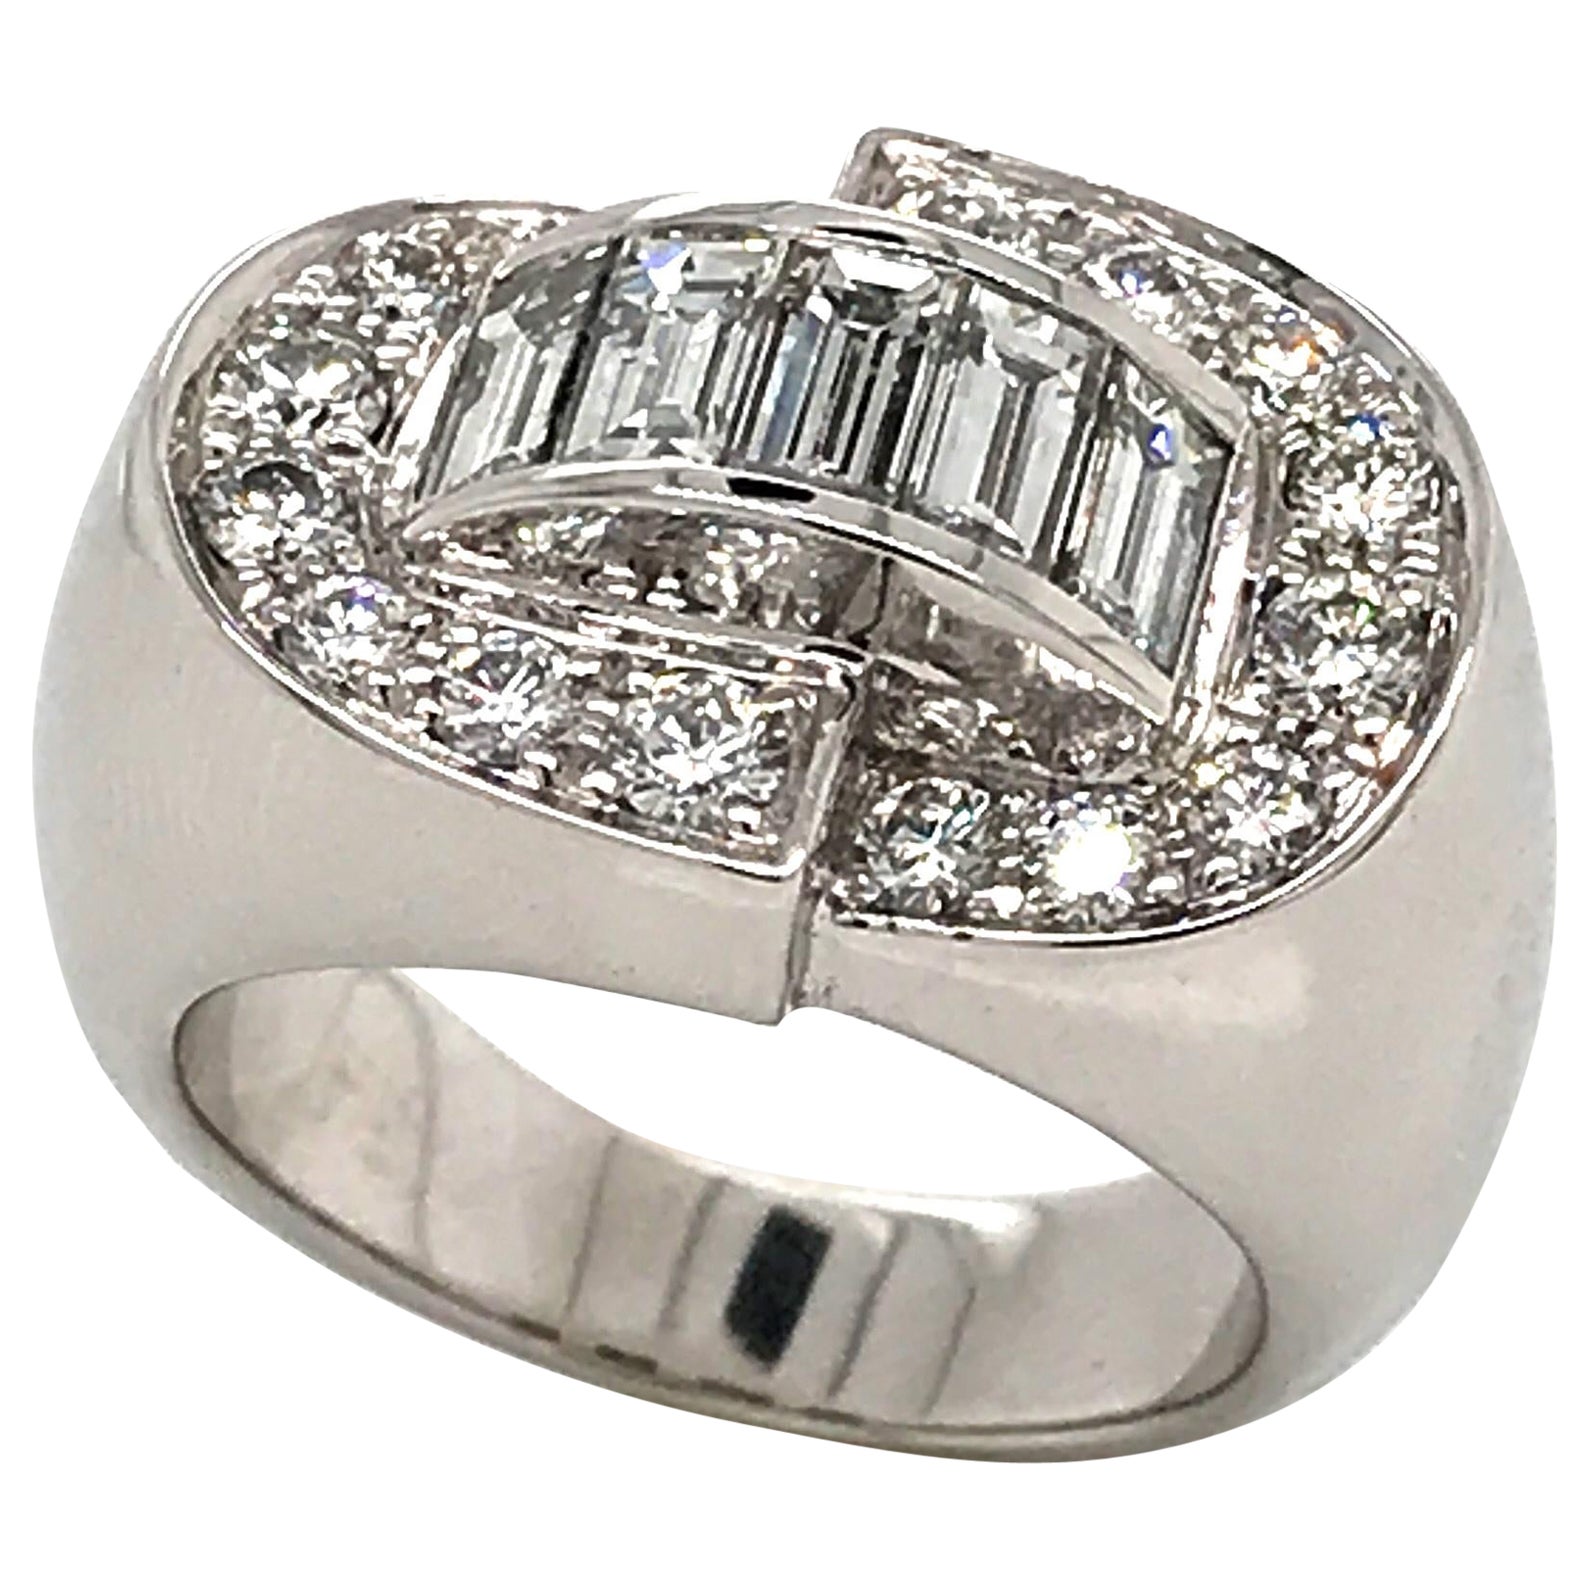 Art Deco Ring White Diamonds Round and Baguettes Cut on White Gold